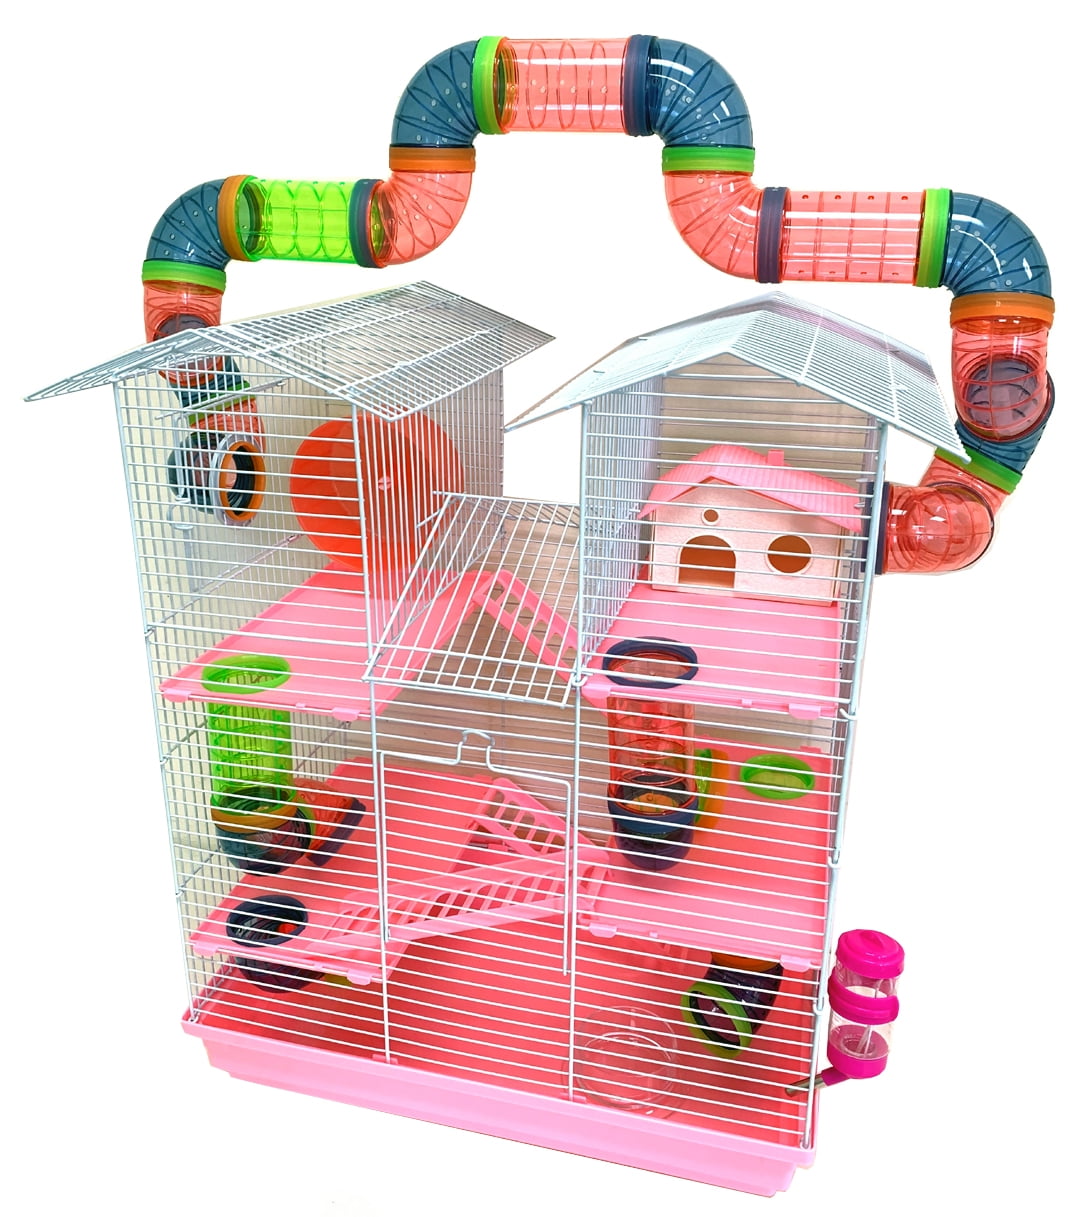 Top Play Zone 5 Level Dwarf Hamster Habitat Rodent Gerbil Rat Mouse Mice Cage 